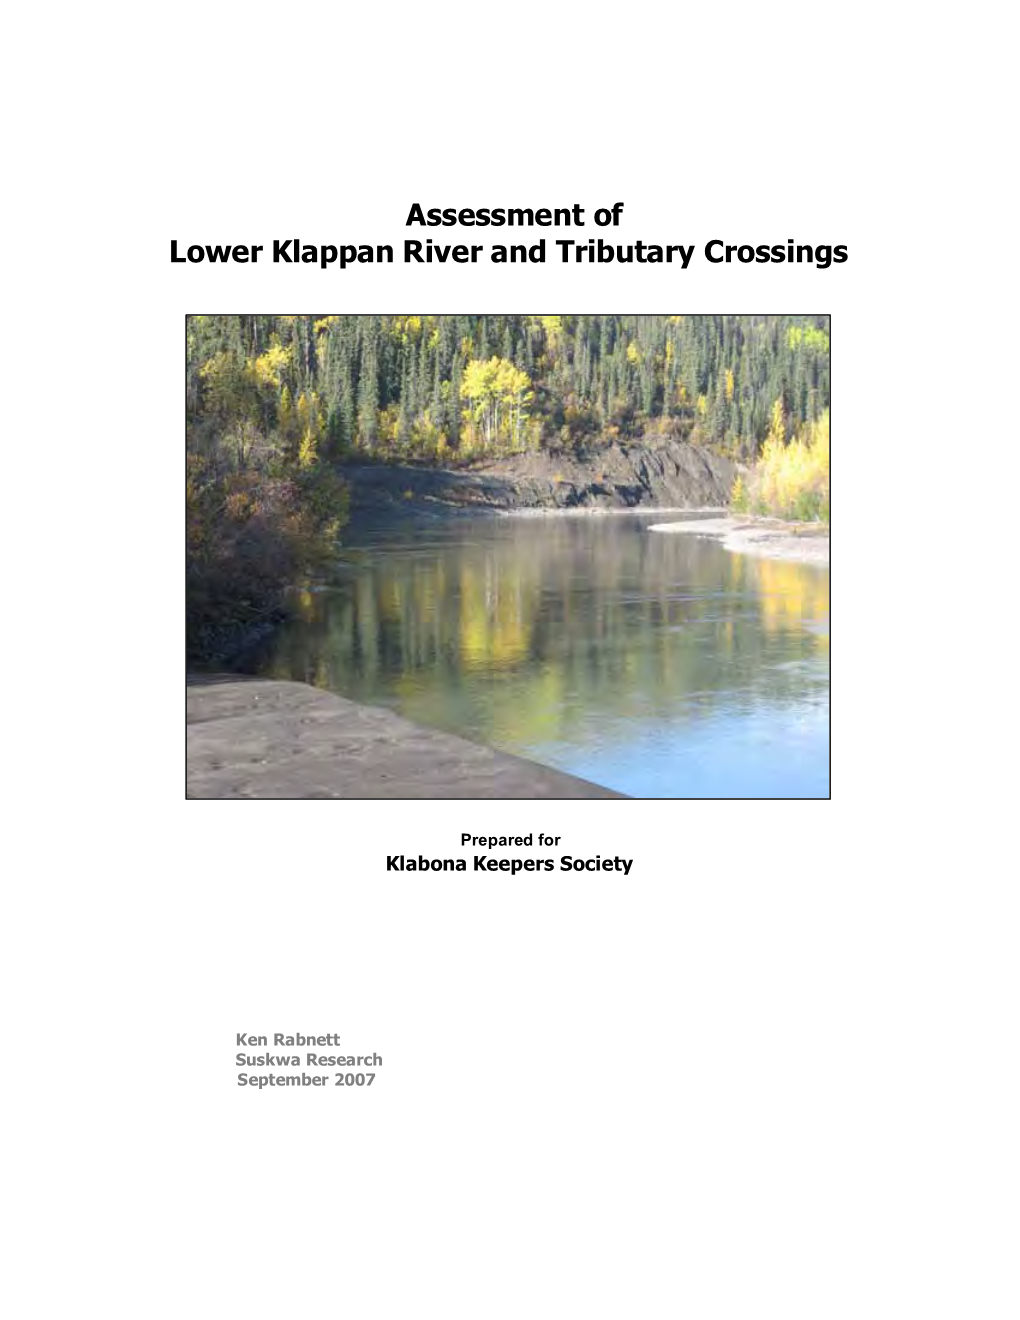 Assessment of Lower Klappan River and Tributary Crossings